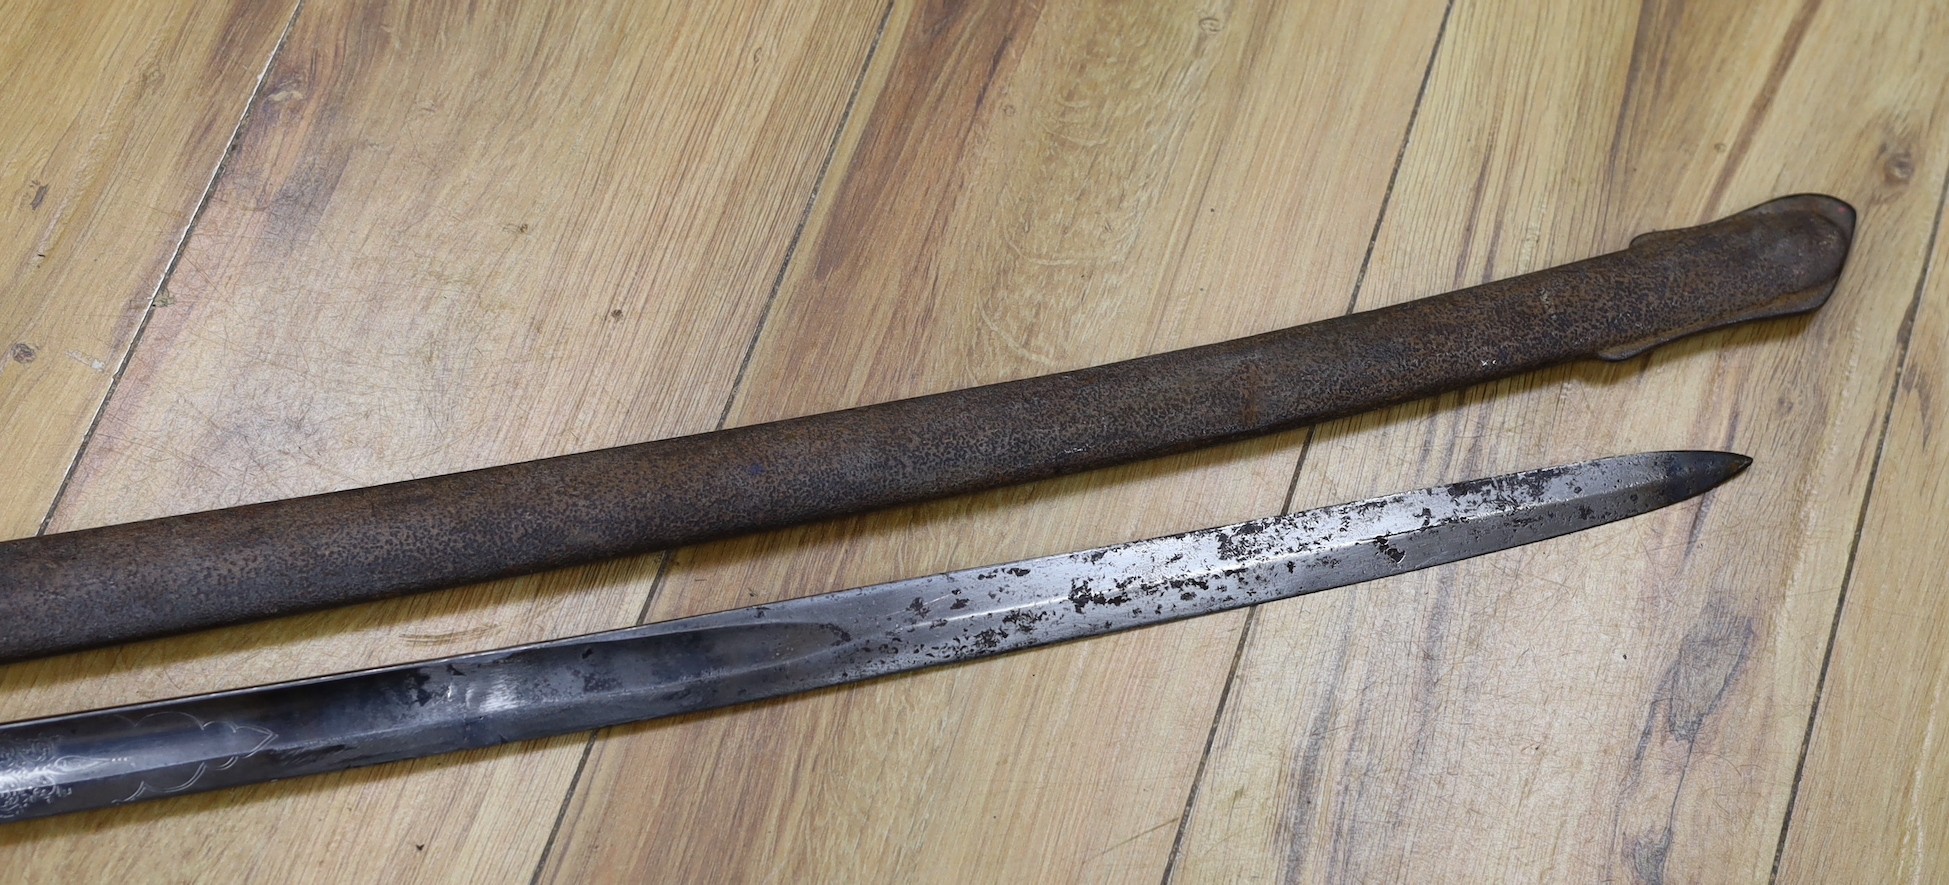 A Victorian 1821 pattern Hawkes & Co sword and scabbard, 104cm total length